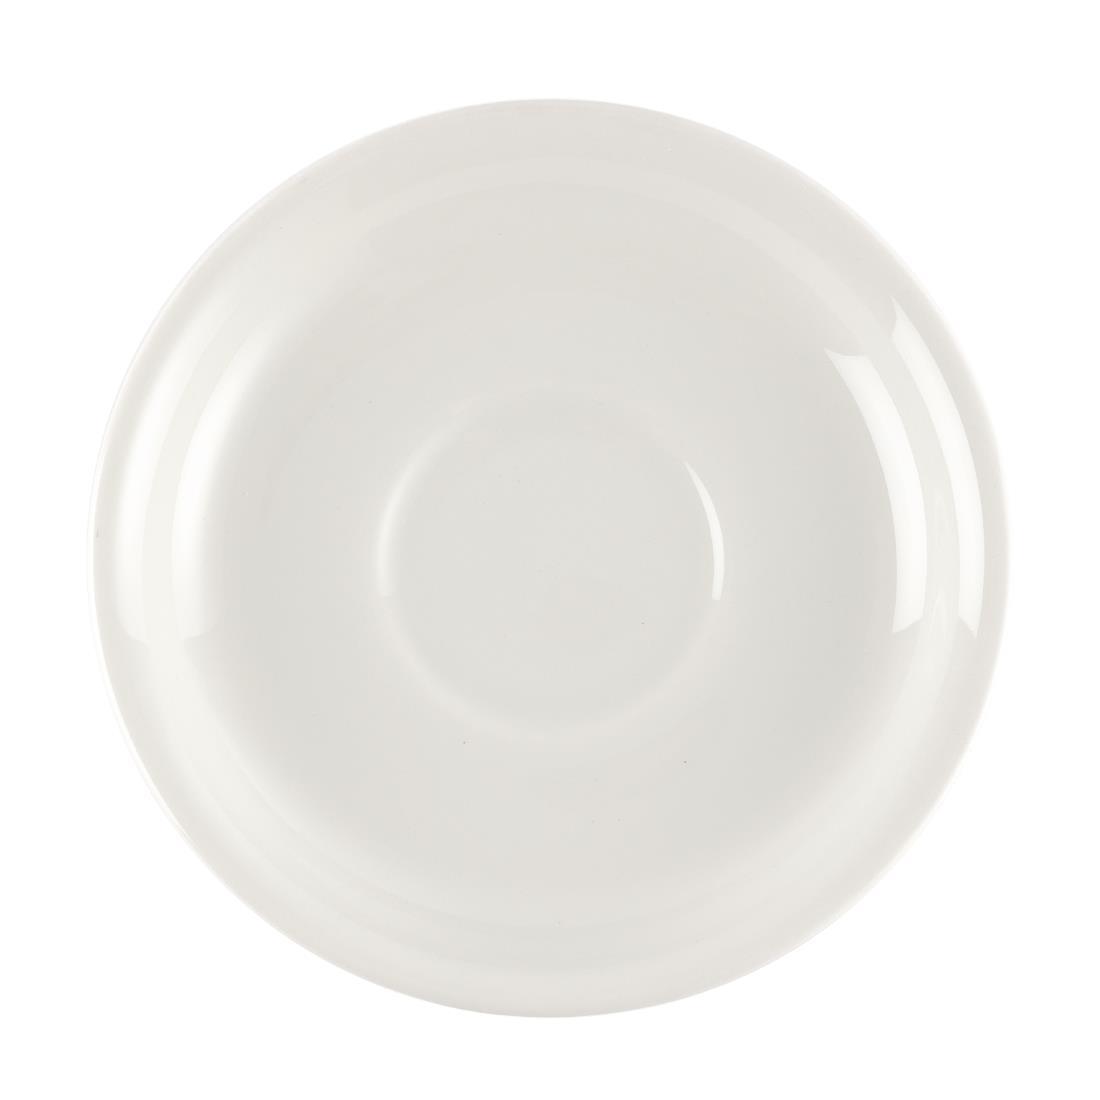 Churchill Plain Whiteware Small Saucers 140mm (Pack of 24) - W887  - 2